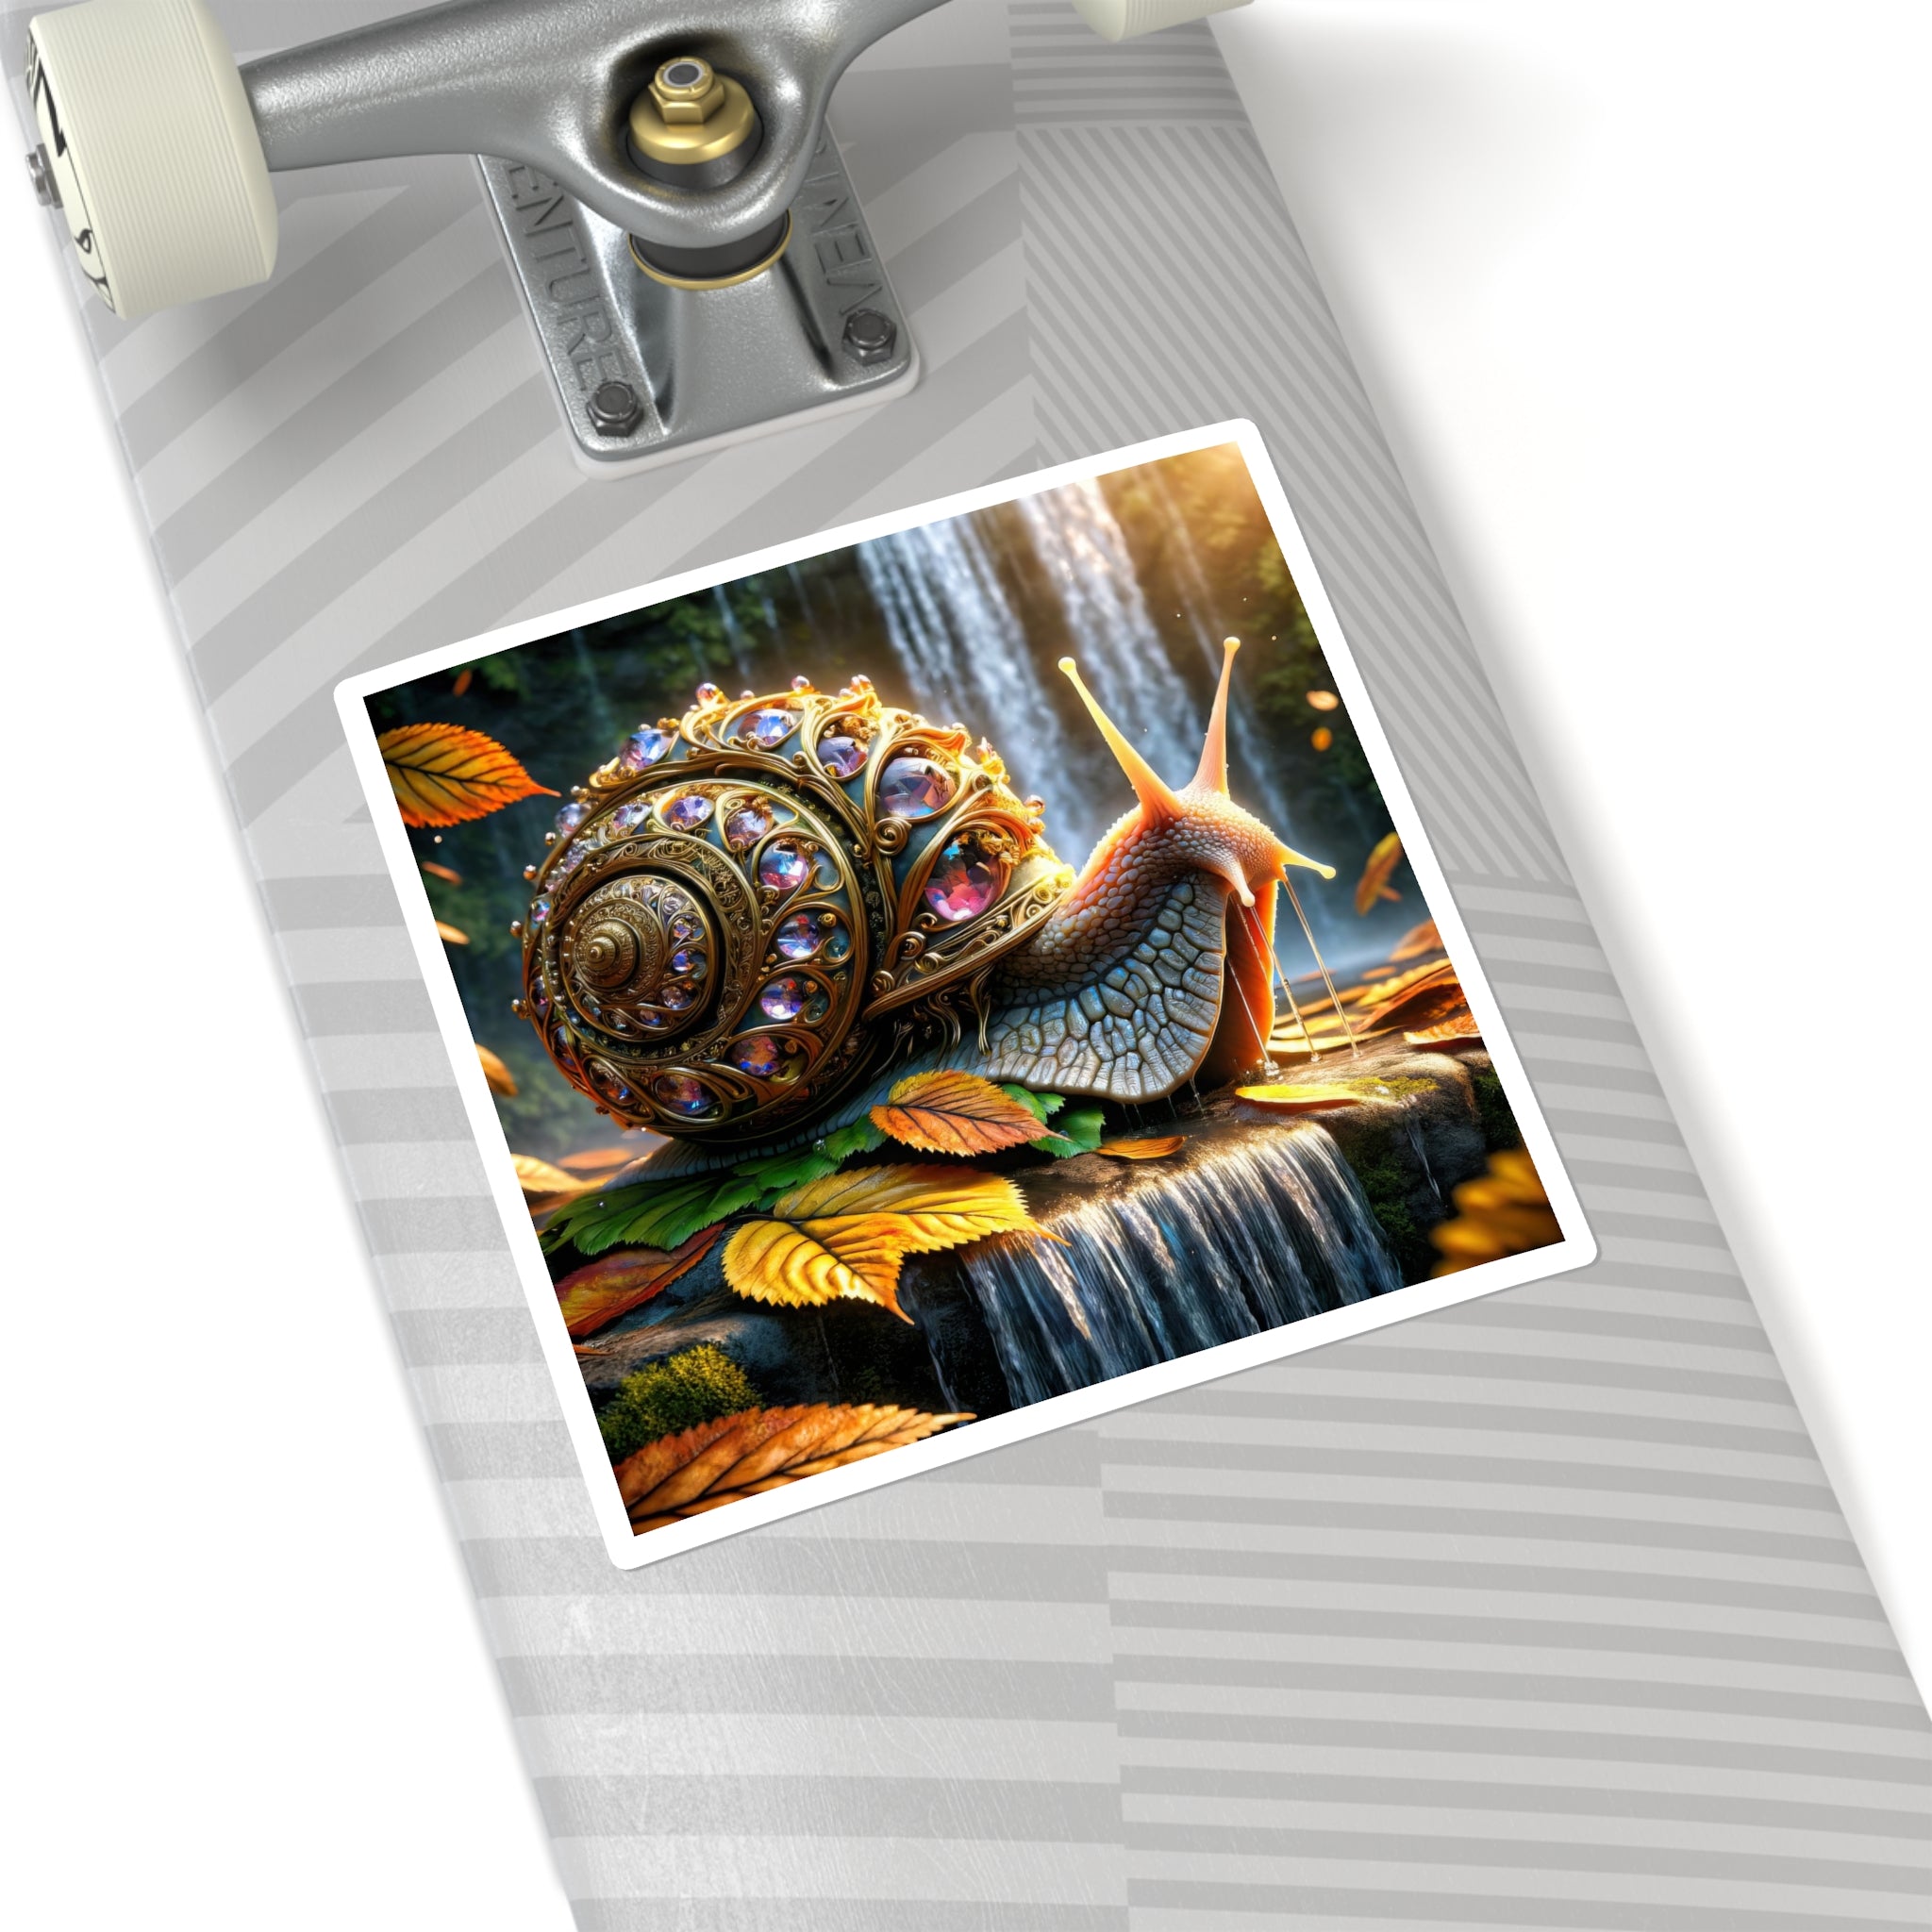 The Gilded Escargot Stickers